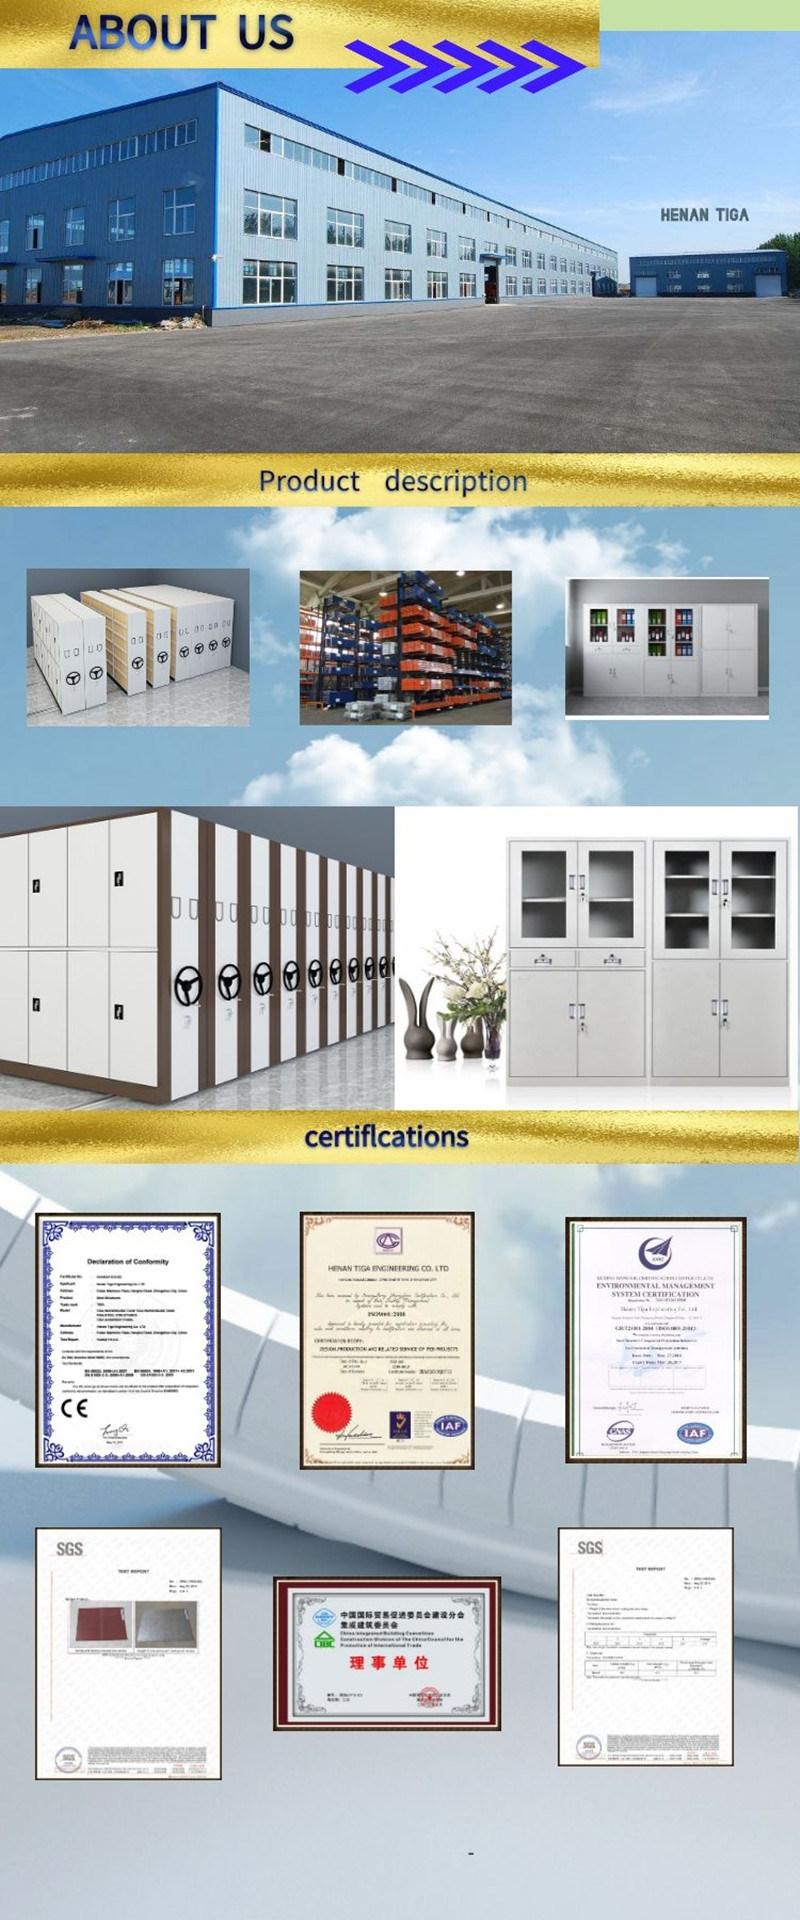 Factory Supply Filing Cabinets Steel Storage Cabinet Electronic Digital Lock Confidential File Cabinet